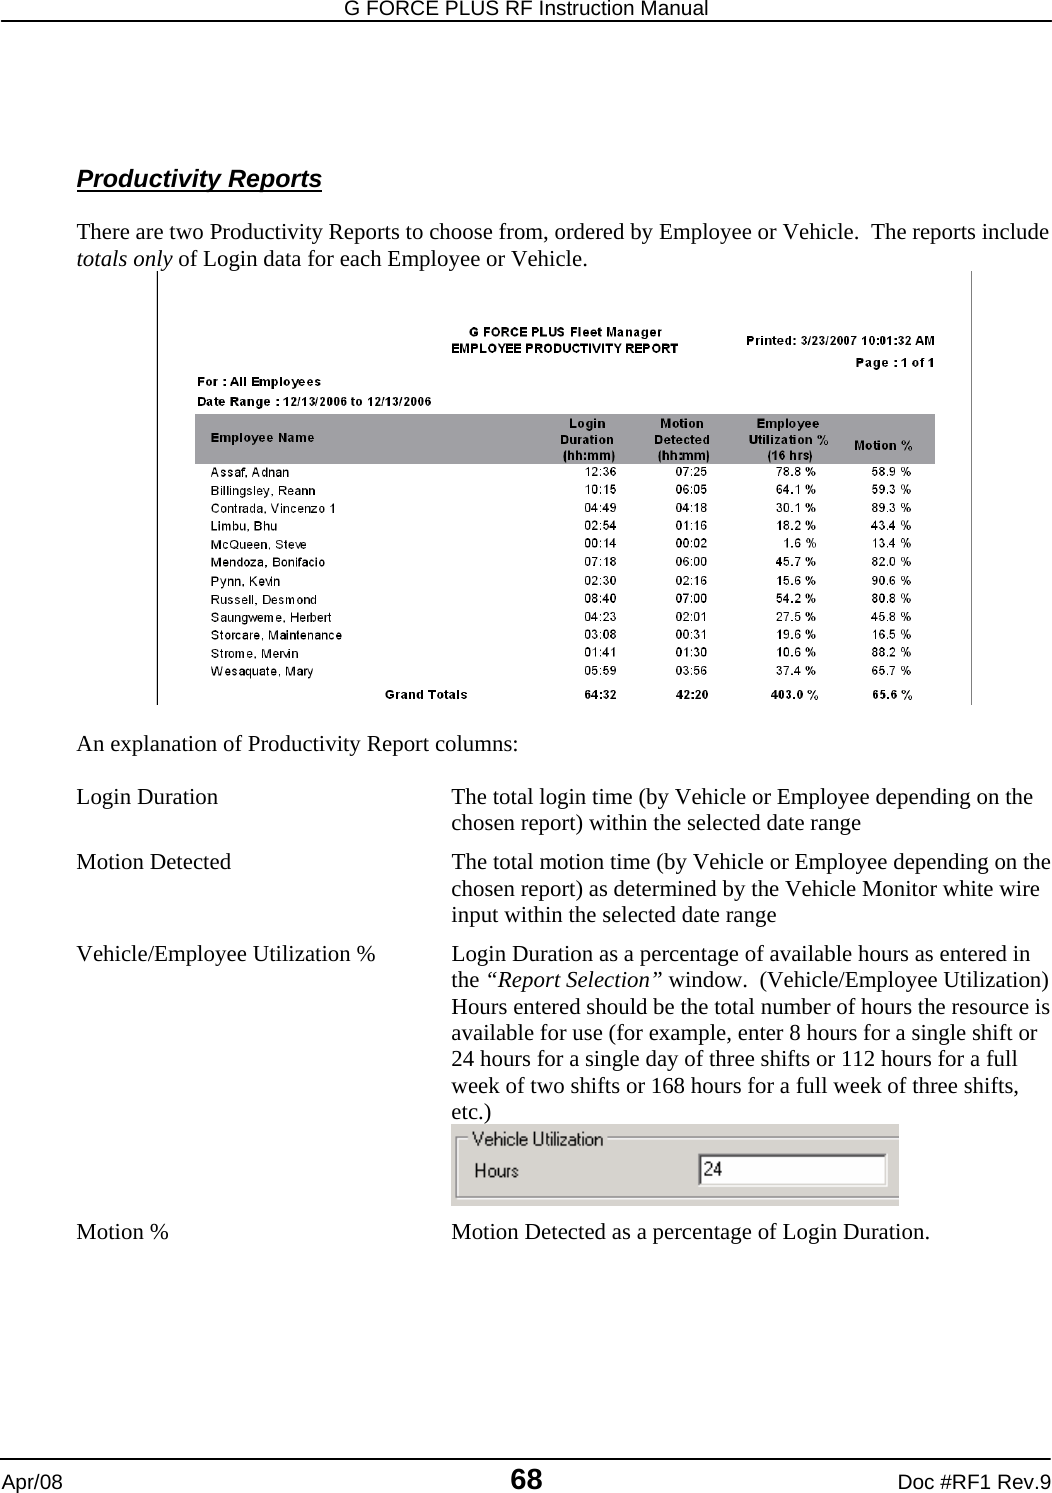 G FORCE PLUS RF Instruction Manual   Apr/08 68 Doc #RF1 Rev.9     Productivity Reports  There are two Productivity Reports to choose from, ordered by Employee or Vehicle.  The reports include totals only of Login data for each Employee or Vehicle.    An explanation of Productivity Report columns:  Login Duration  The total login time (by Vehicle or Employee depending on the chosen report) within the selected date range Motion Detected  The total motion time (by Vehicle or Employee depending on the chosen report) as determined by the Vehicle Monitor white wire input within the selected date range  Vehicle/Employee Utilization %  Login Duration as a percentage of available hours as entered in the “Report Selection” window.  (Vehicle/Employee Utilization) Hours entered should be the total number of hours the resource is available for use (for example, enter 8 hours for a single shift or 24 hours for a single day of three shifts or 112 hours for a full week of two shifts or 168 hours for a full week of three shifts, etc.)  Motion %  Motion Detected as a percentage of Login Duration.       